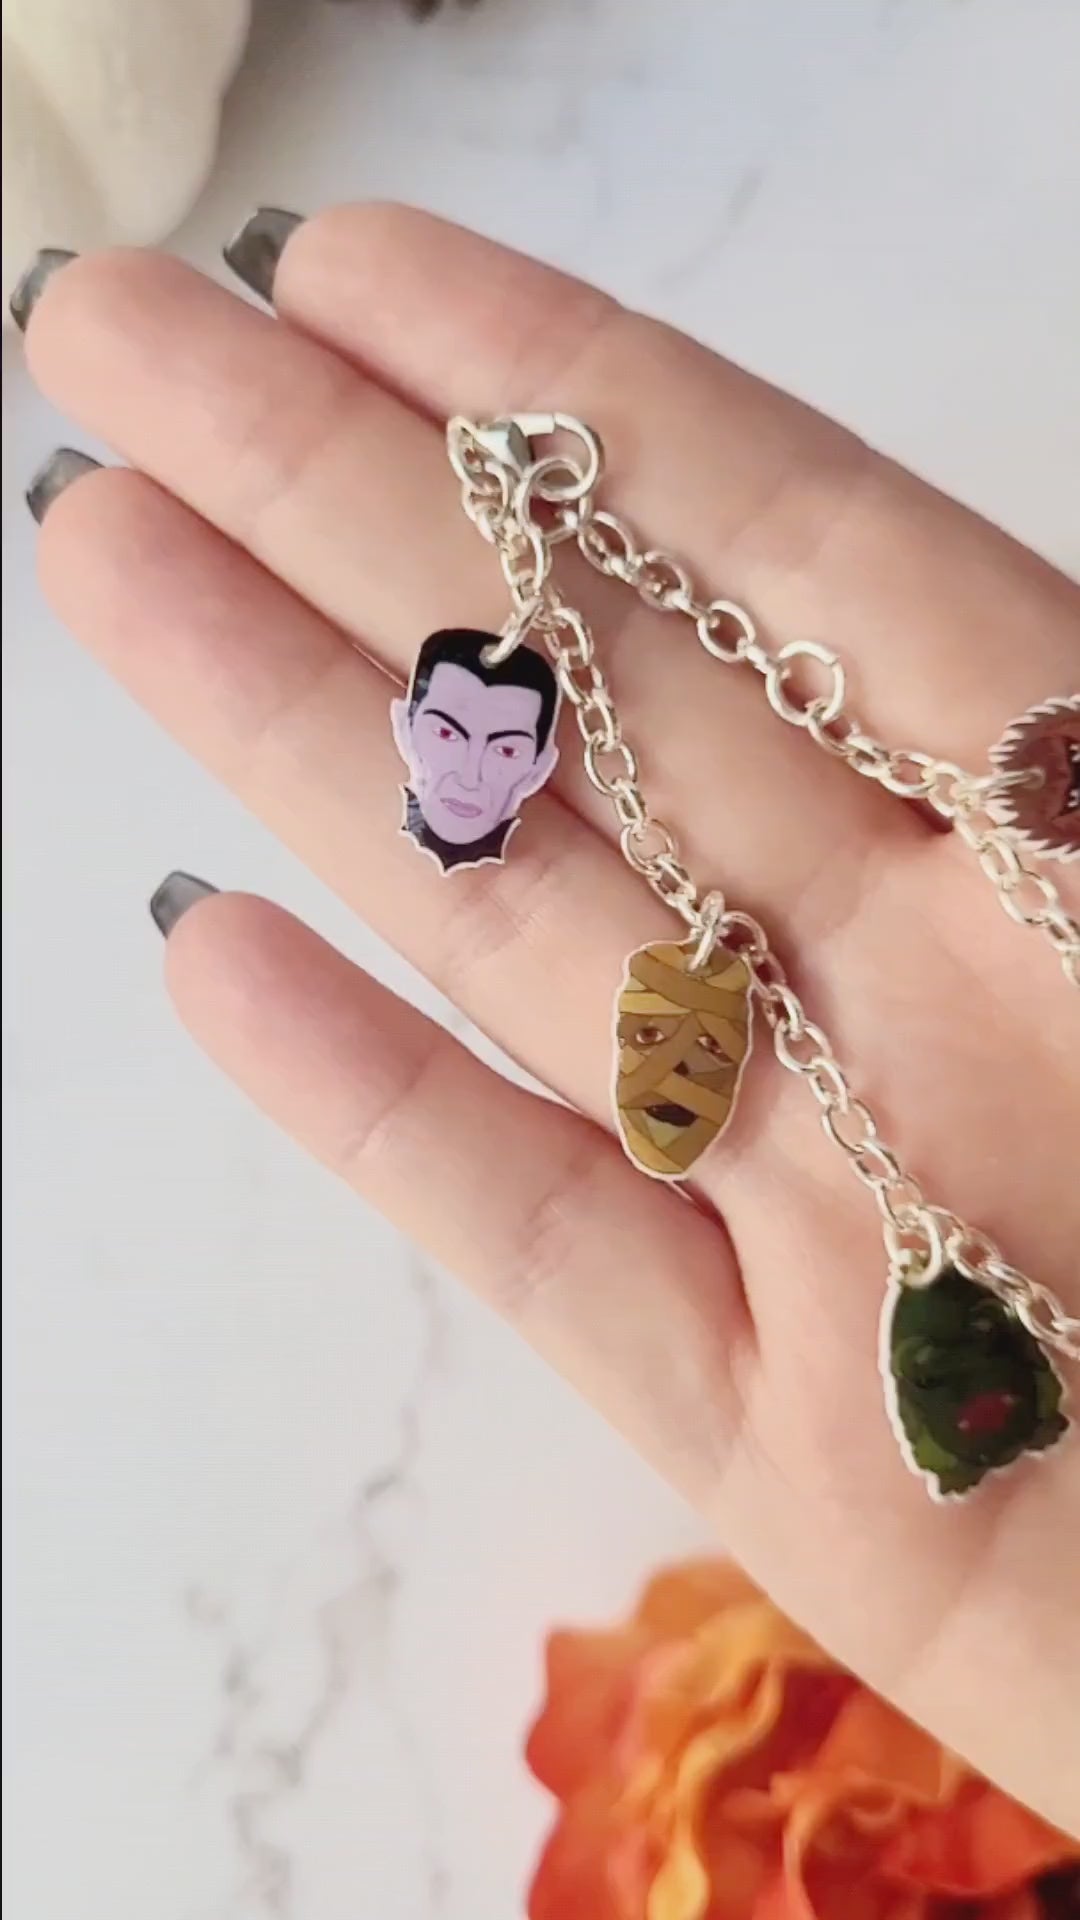 video close up of universal monster charm bracelet on a marble background .